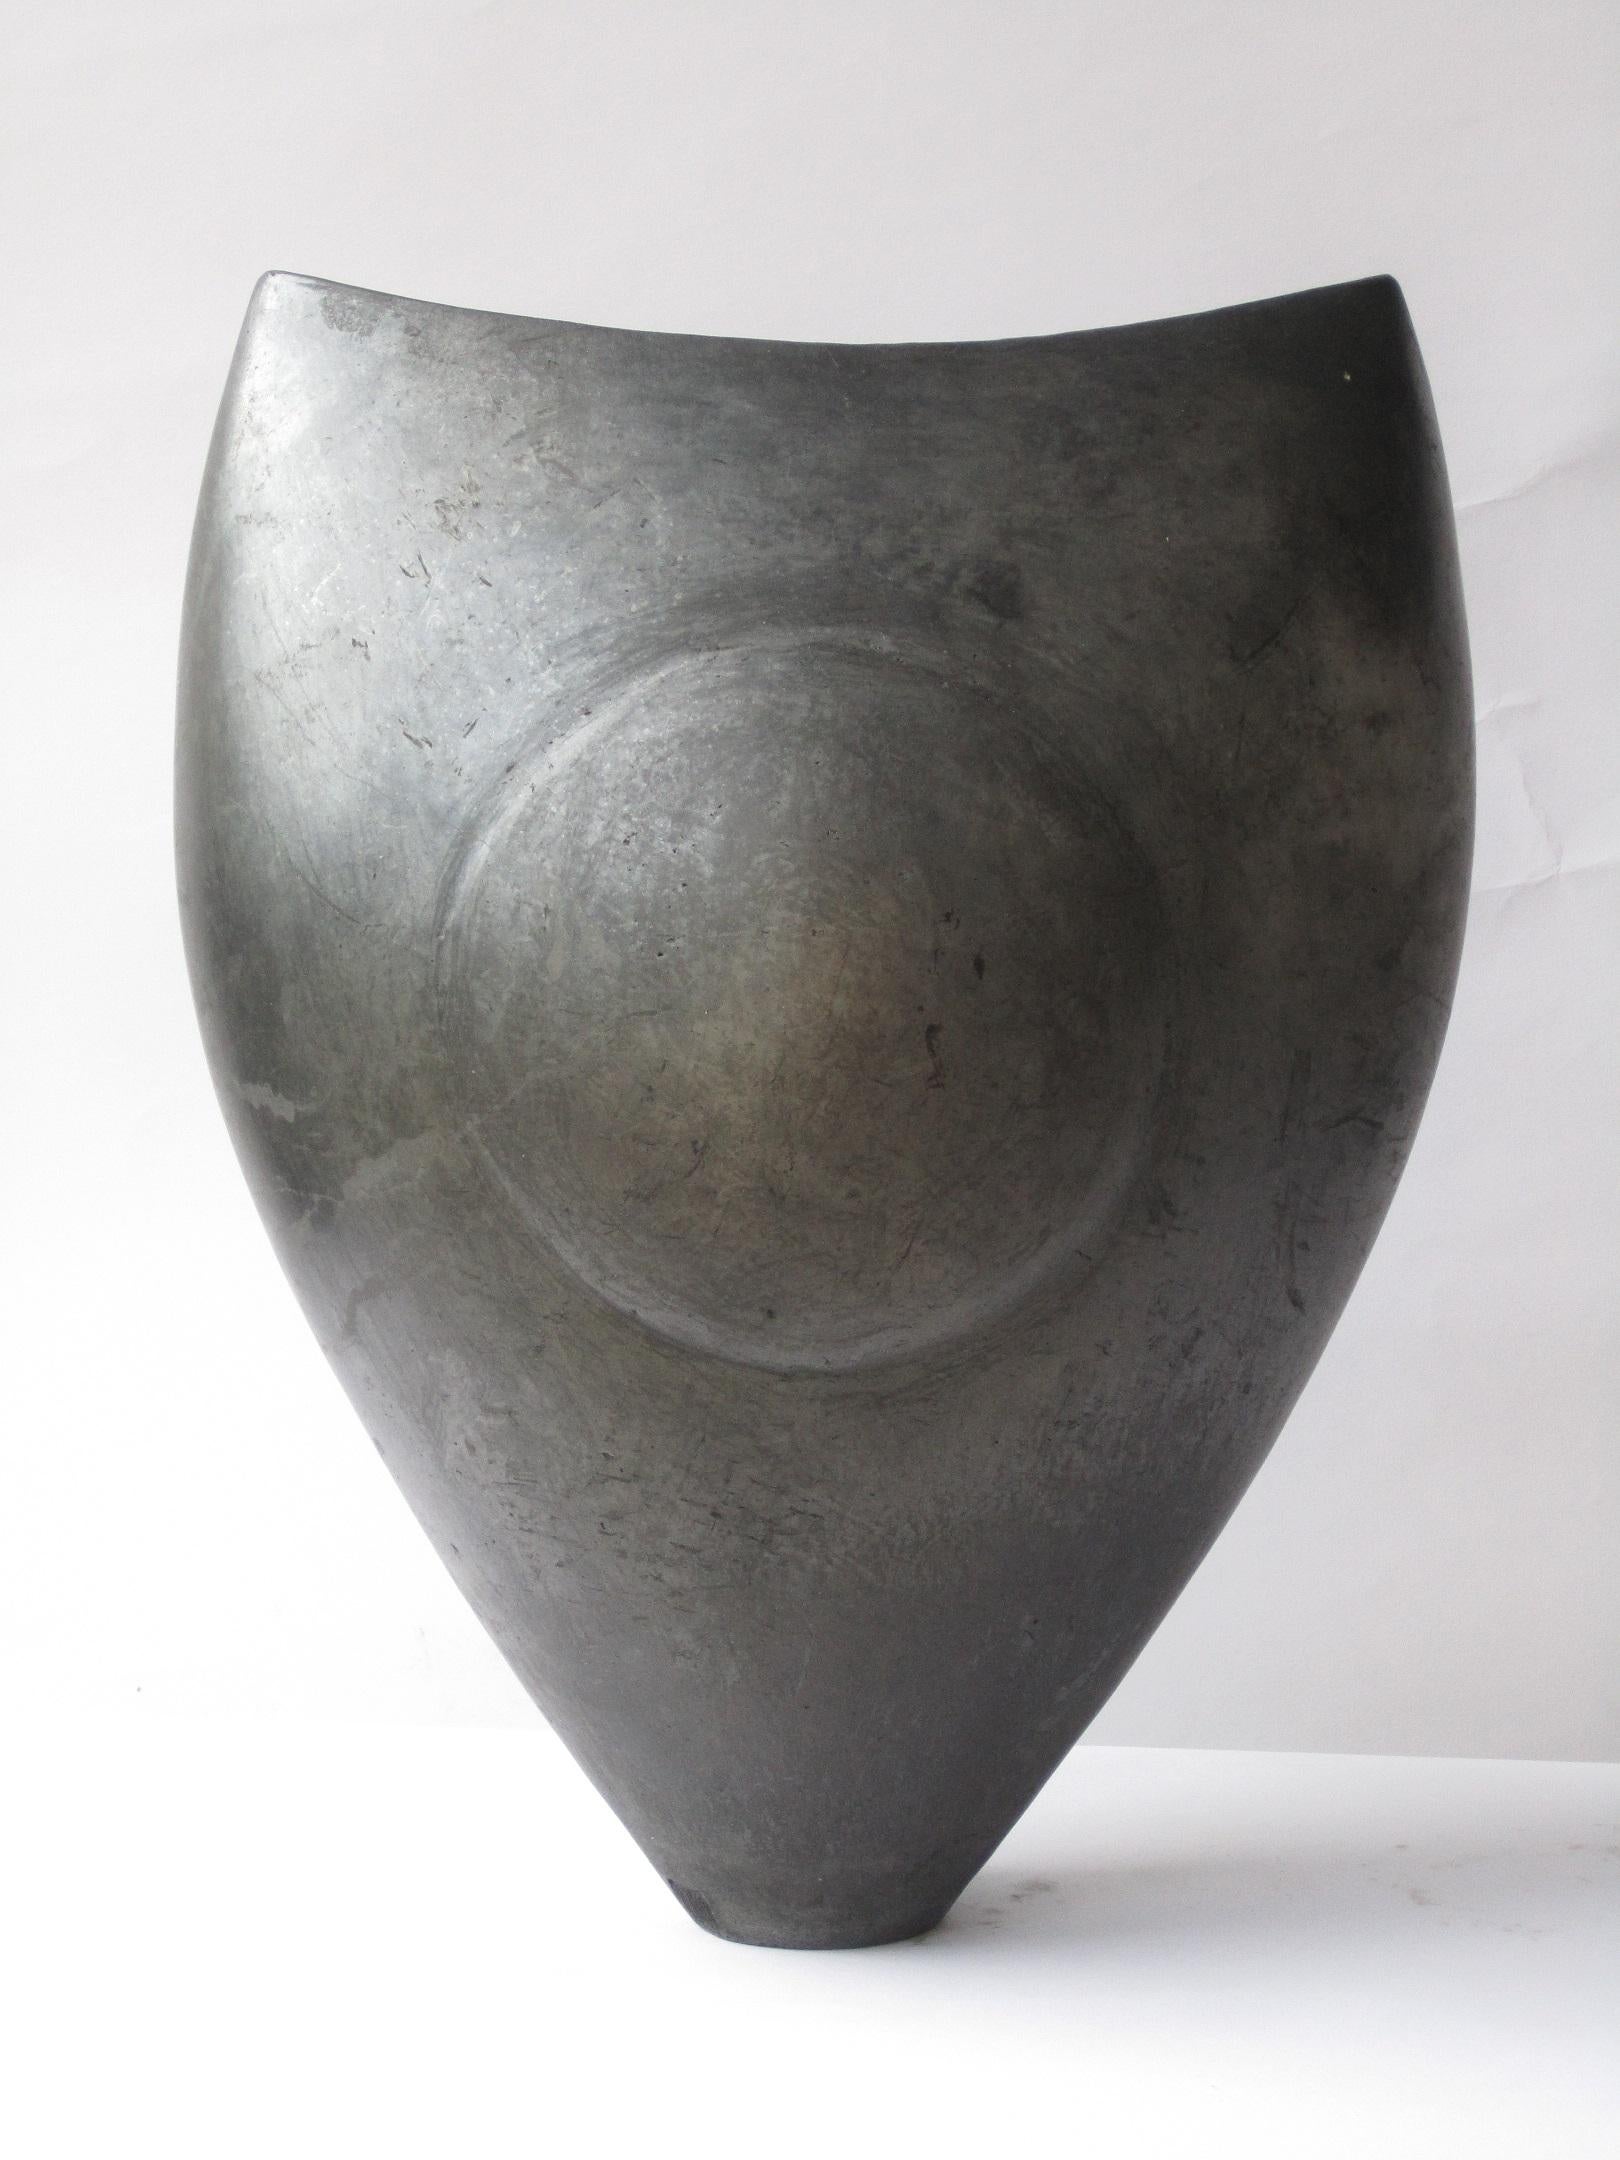 Black Moon (2019) is a one-off ceramic sculpture by contemporary artist Tien Wen whose work revolves around the idea of abstraction and the pureness of shapes. Thanks to the raku technique, dear to the artist, the sculpture takes on a metallic tint